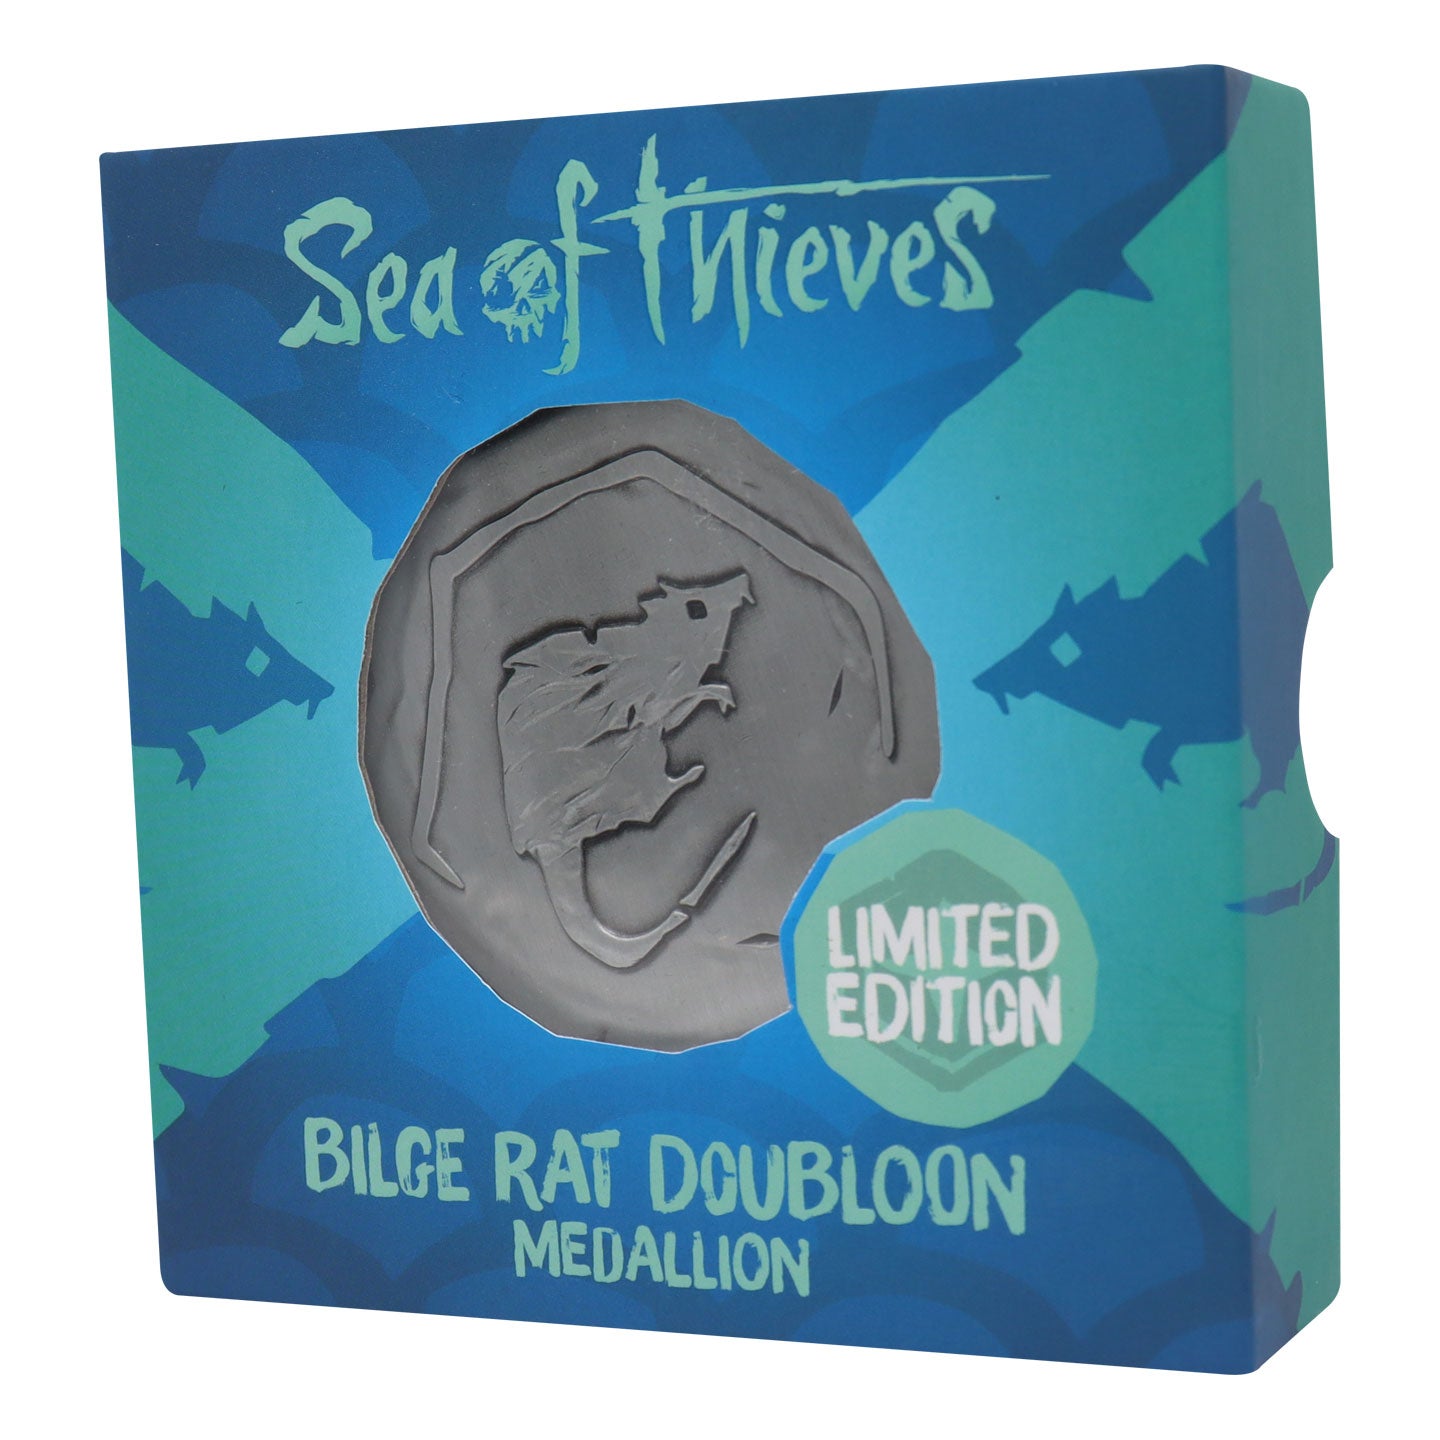 Sea of Thieves Limited Edition Replica Bilge Rat Doubloon